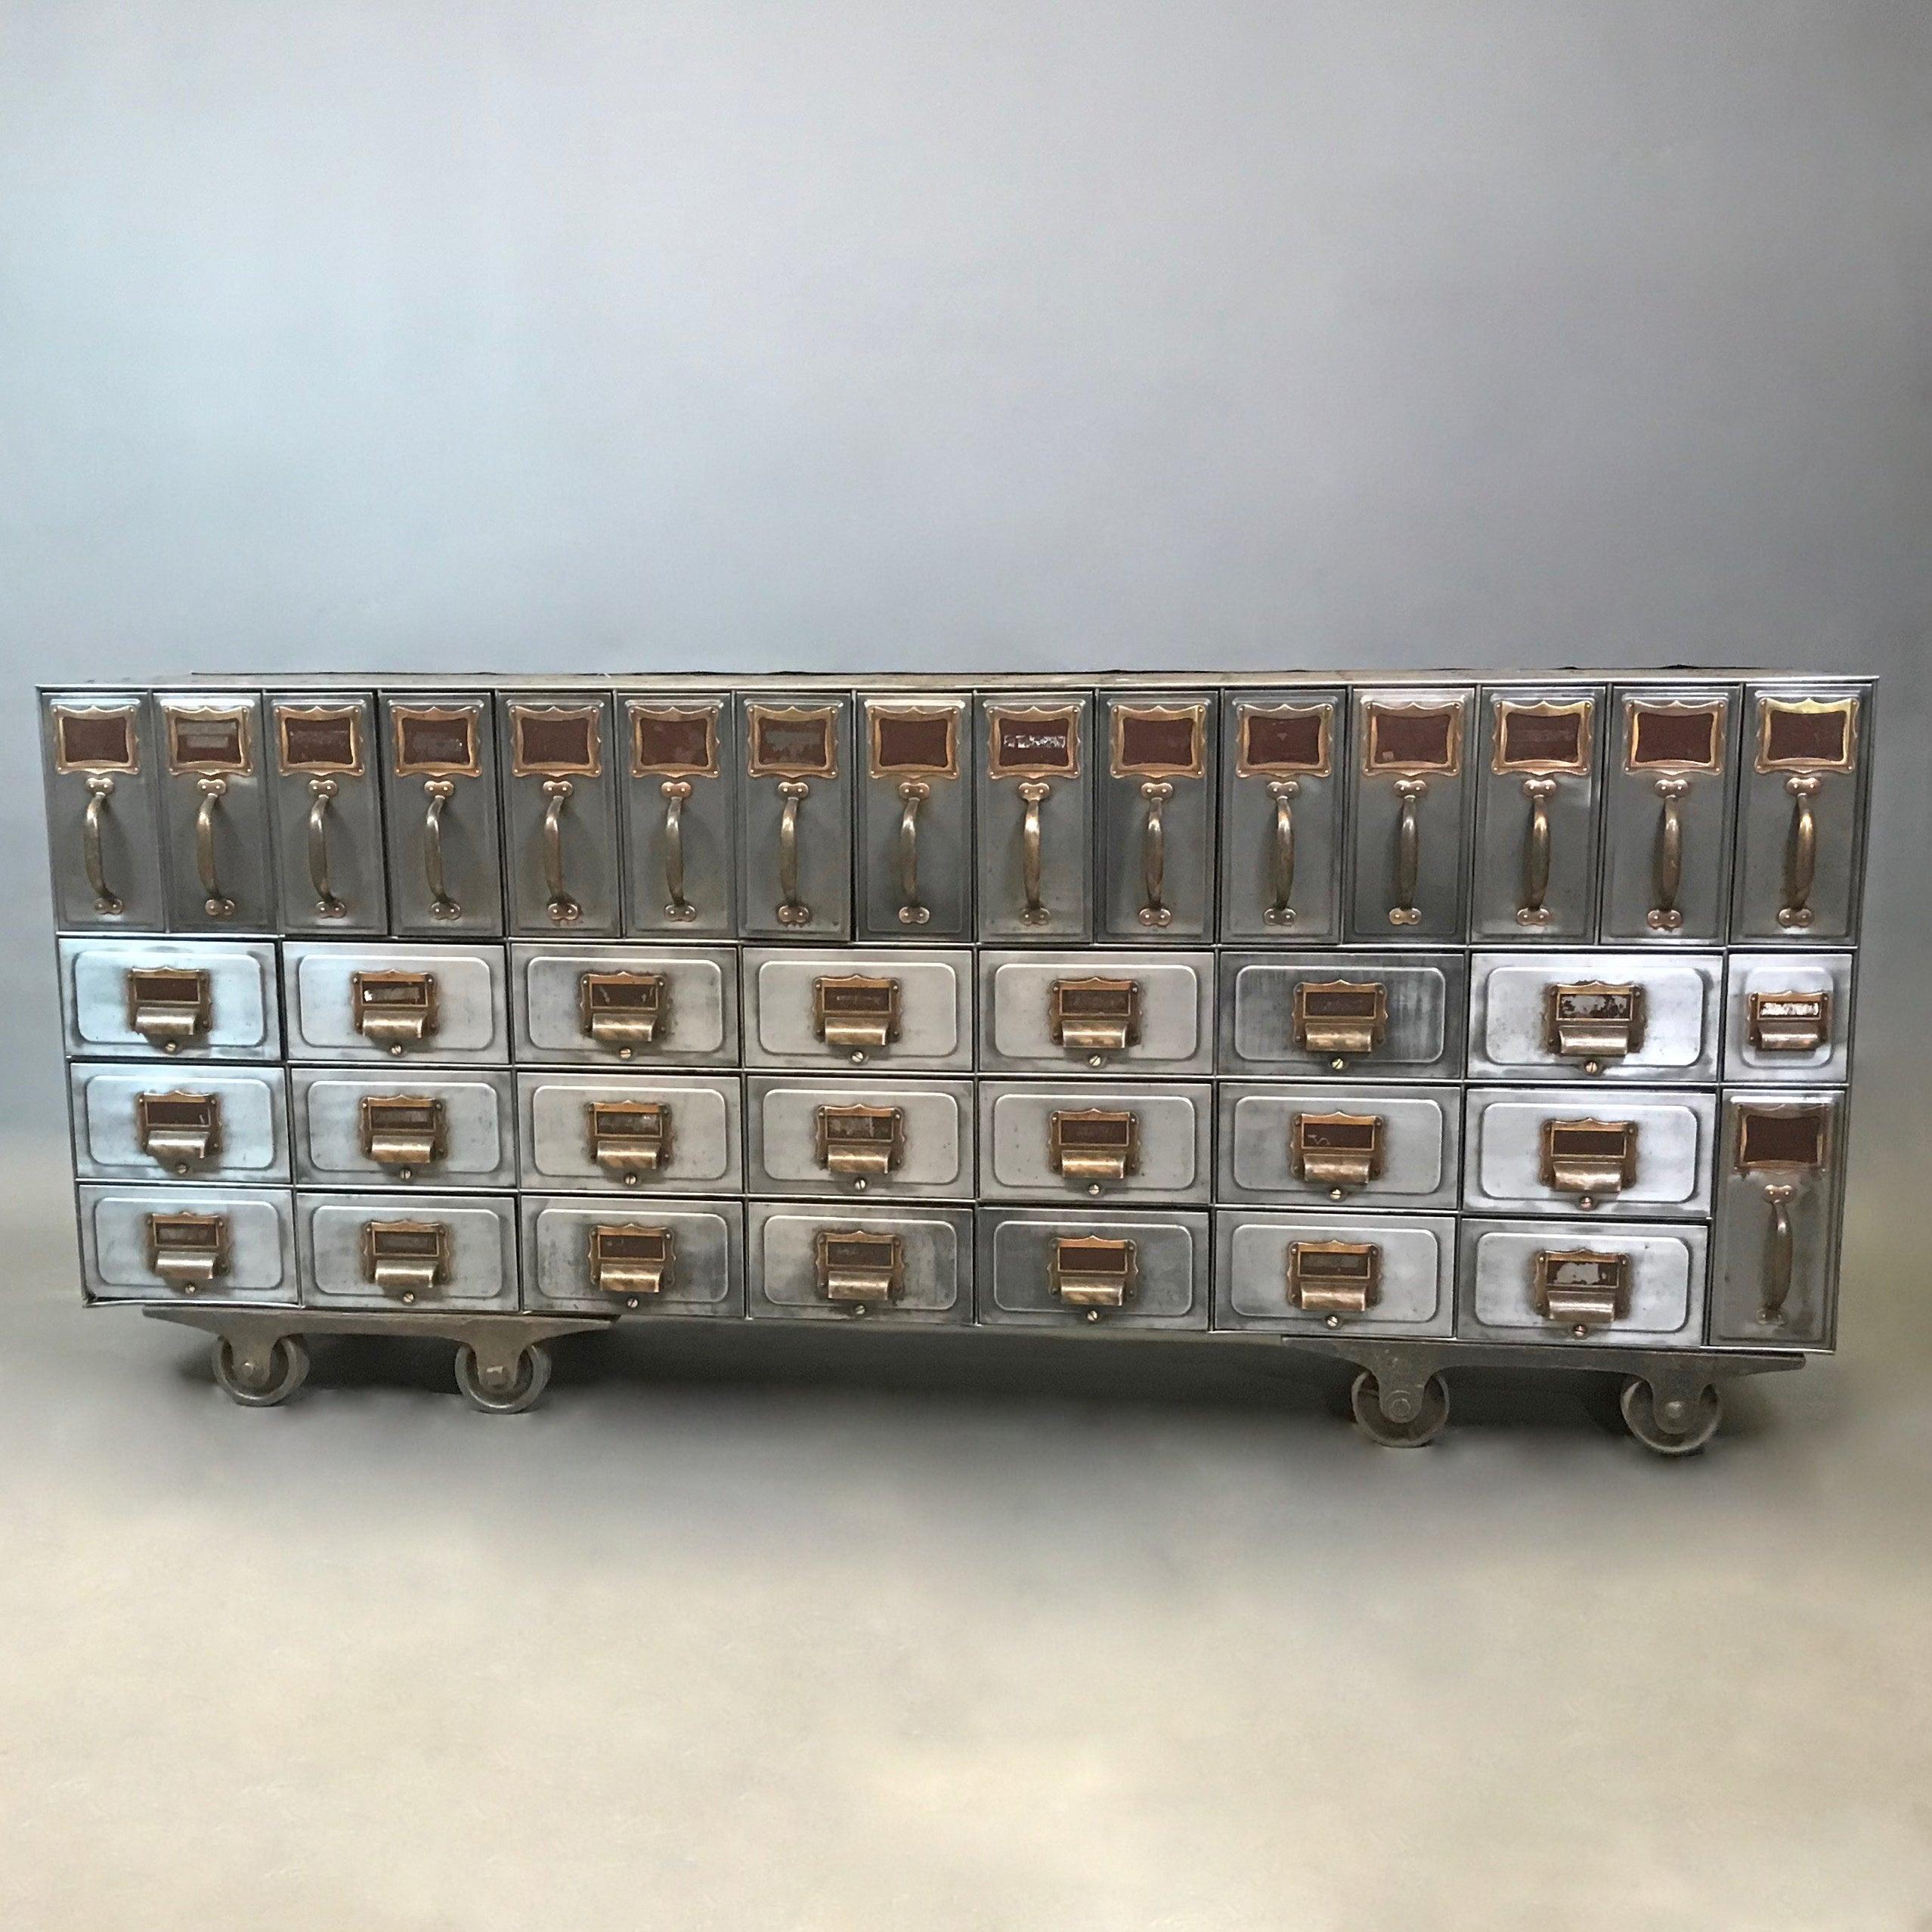 Rare, early 20th century, industrial, brushed steel, file storage console features 38 drawers in a unique linear configuration with brass cup pulls, handles and name plates on cast iron, rolling dollies. The console has an unfinished top that can